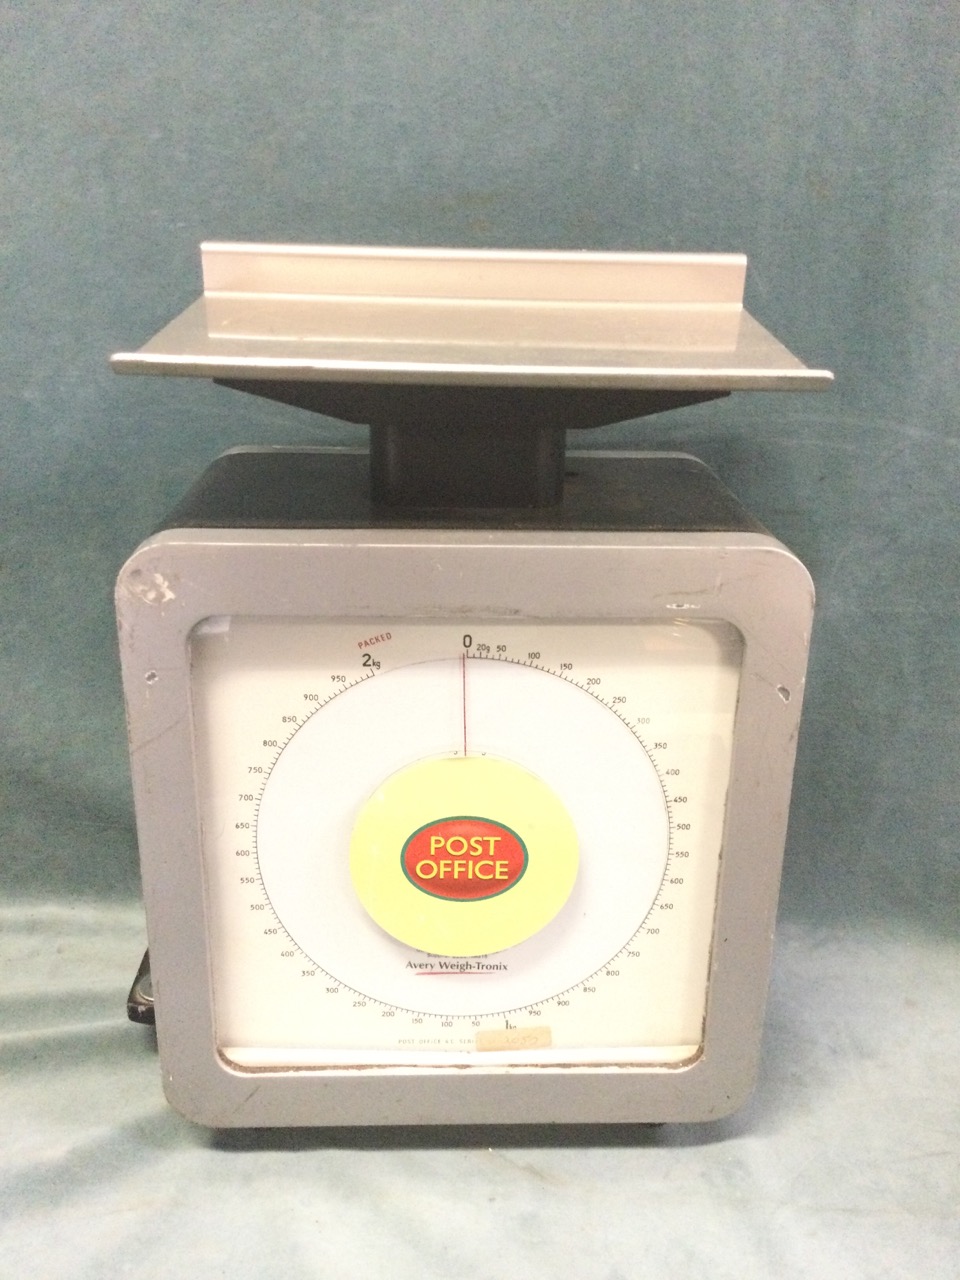 A set of 2006 Post Office scales by Avery Weigh-Tronix, with rounded square two-sided dial to - Image 2 of 3